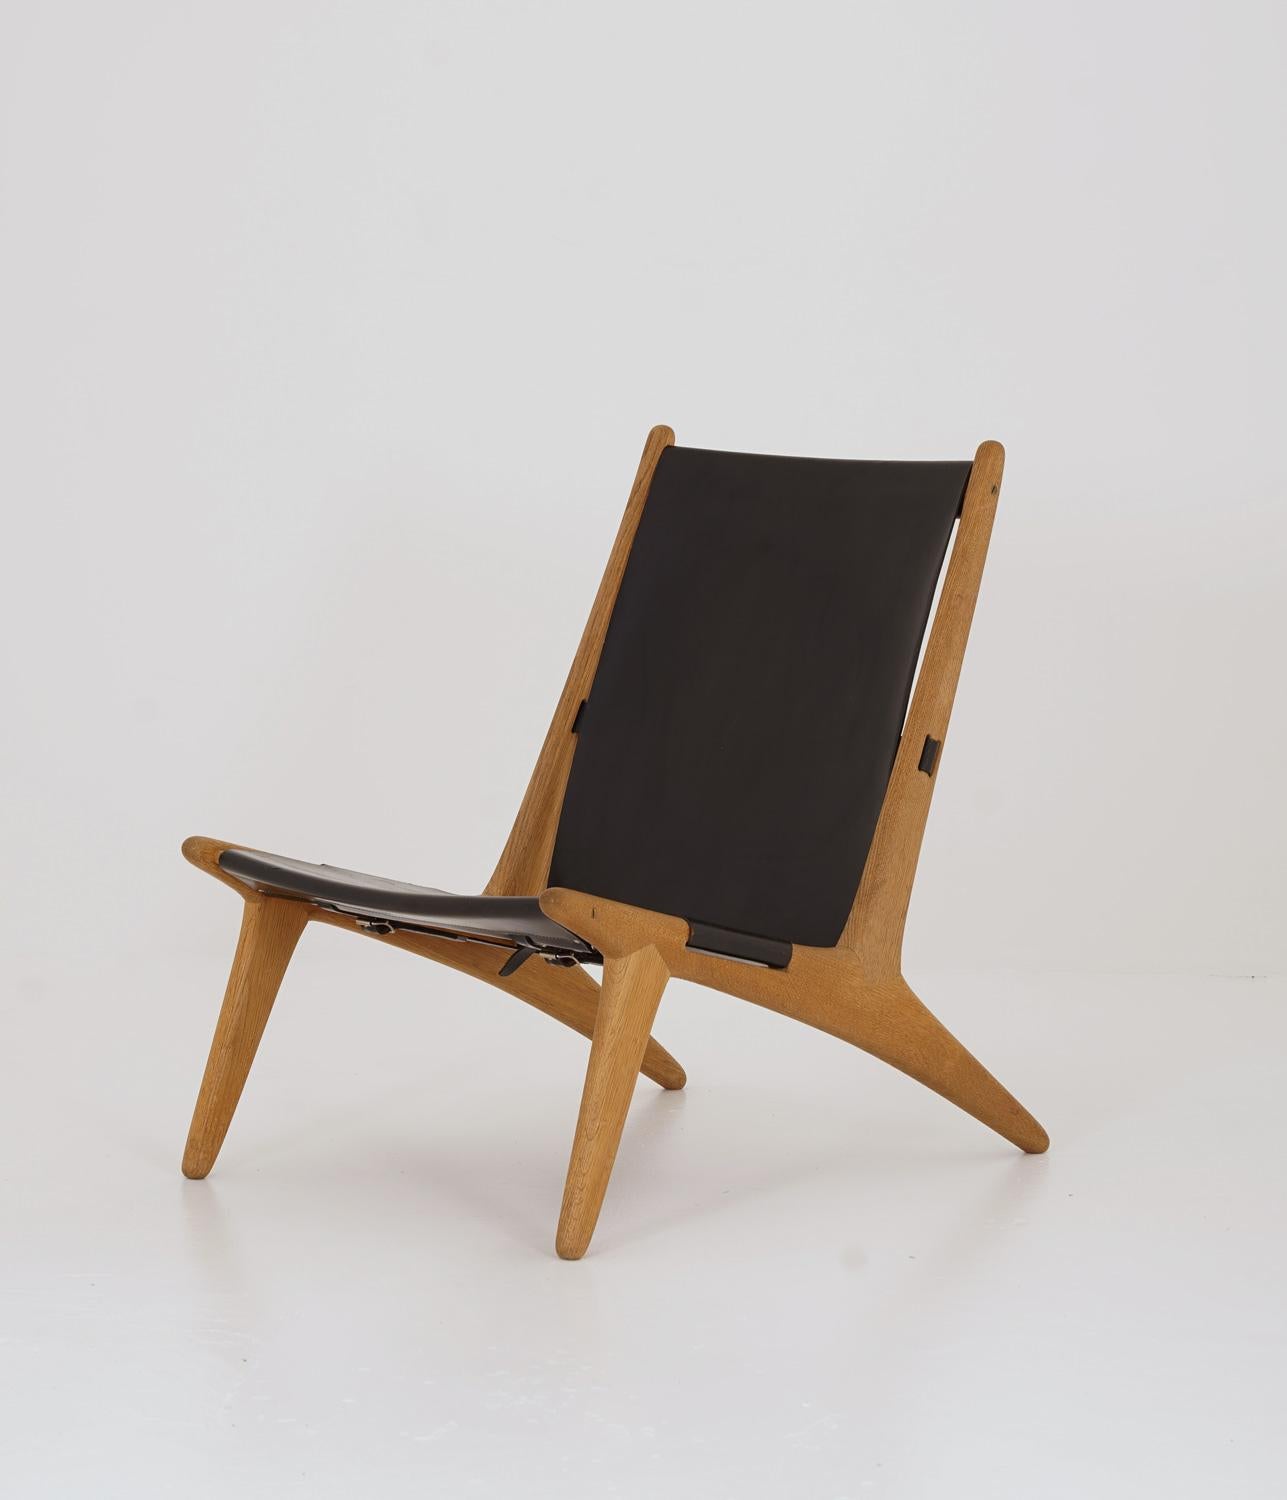 Rare lounge chair model 204 by Uno & Östen Kristiansson for Luxus, Sweden.
The hunting chair was designed by Uno and Östen Kristiansson in 1954 and belongs at the top of Swedish design history. The chair features a frame in oak and a leather seat.